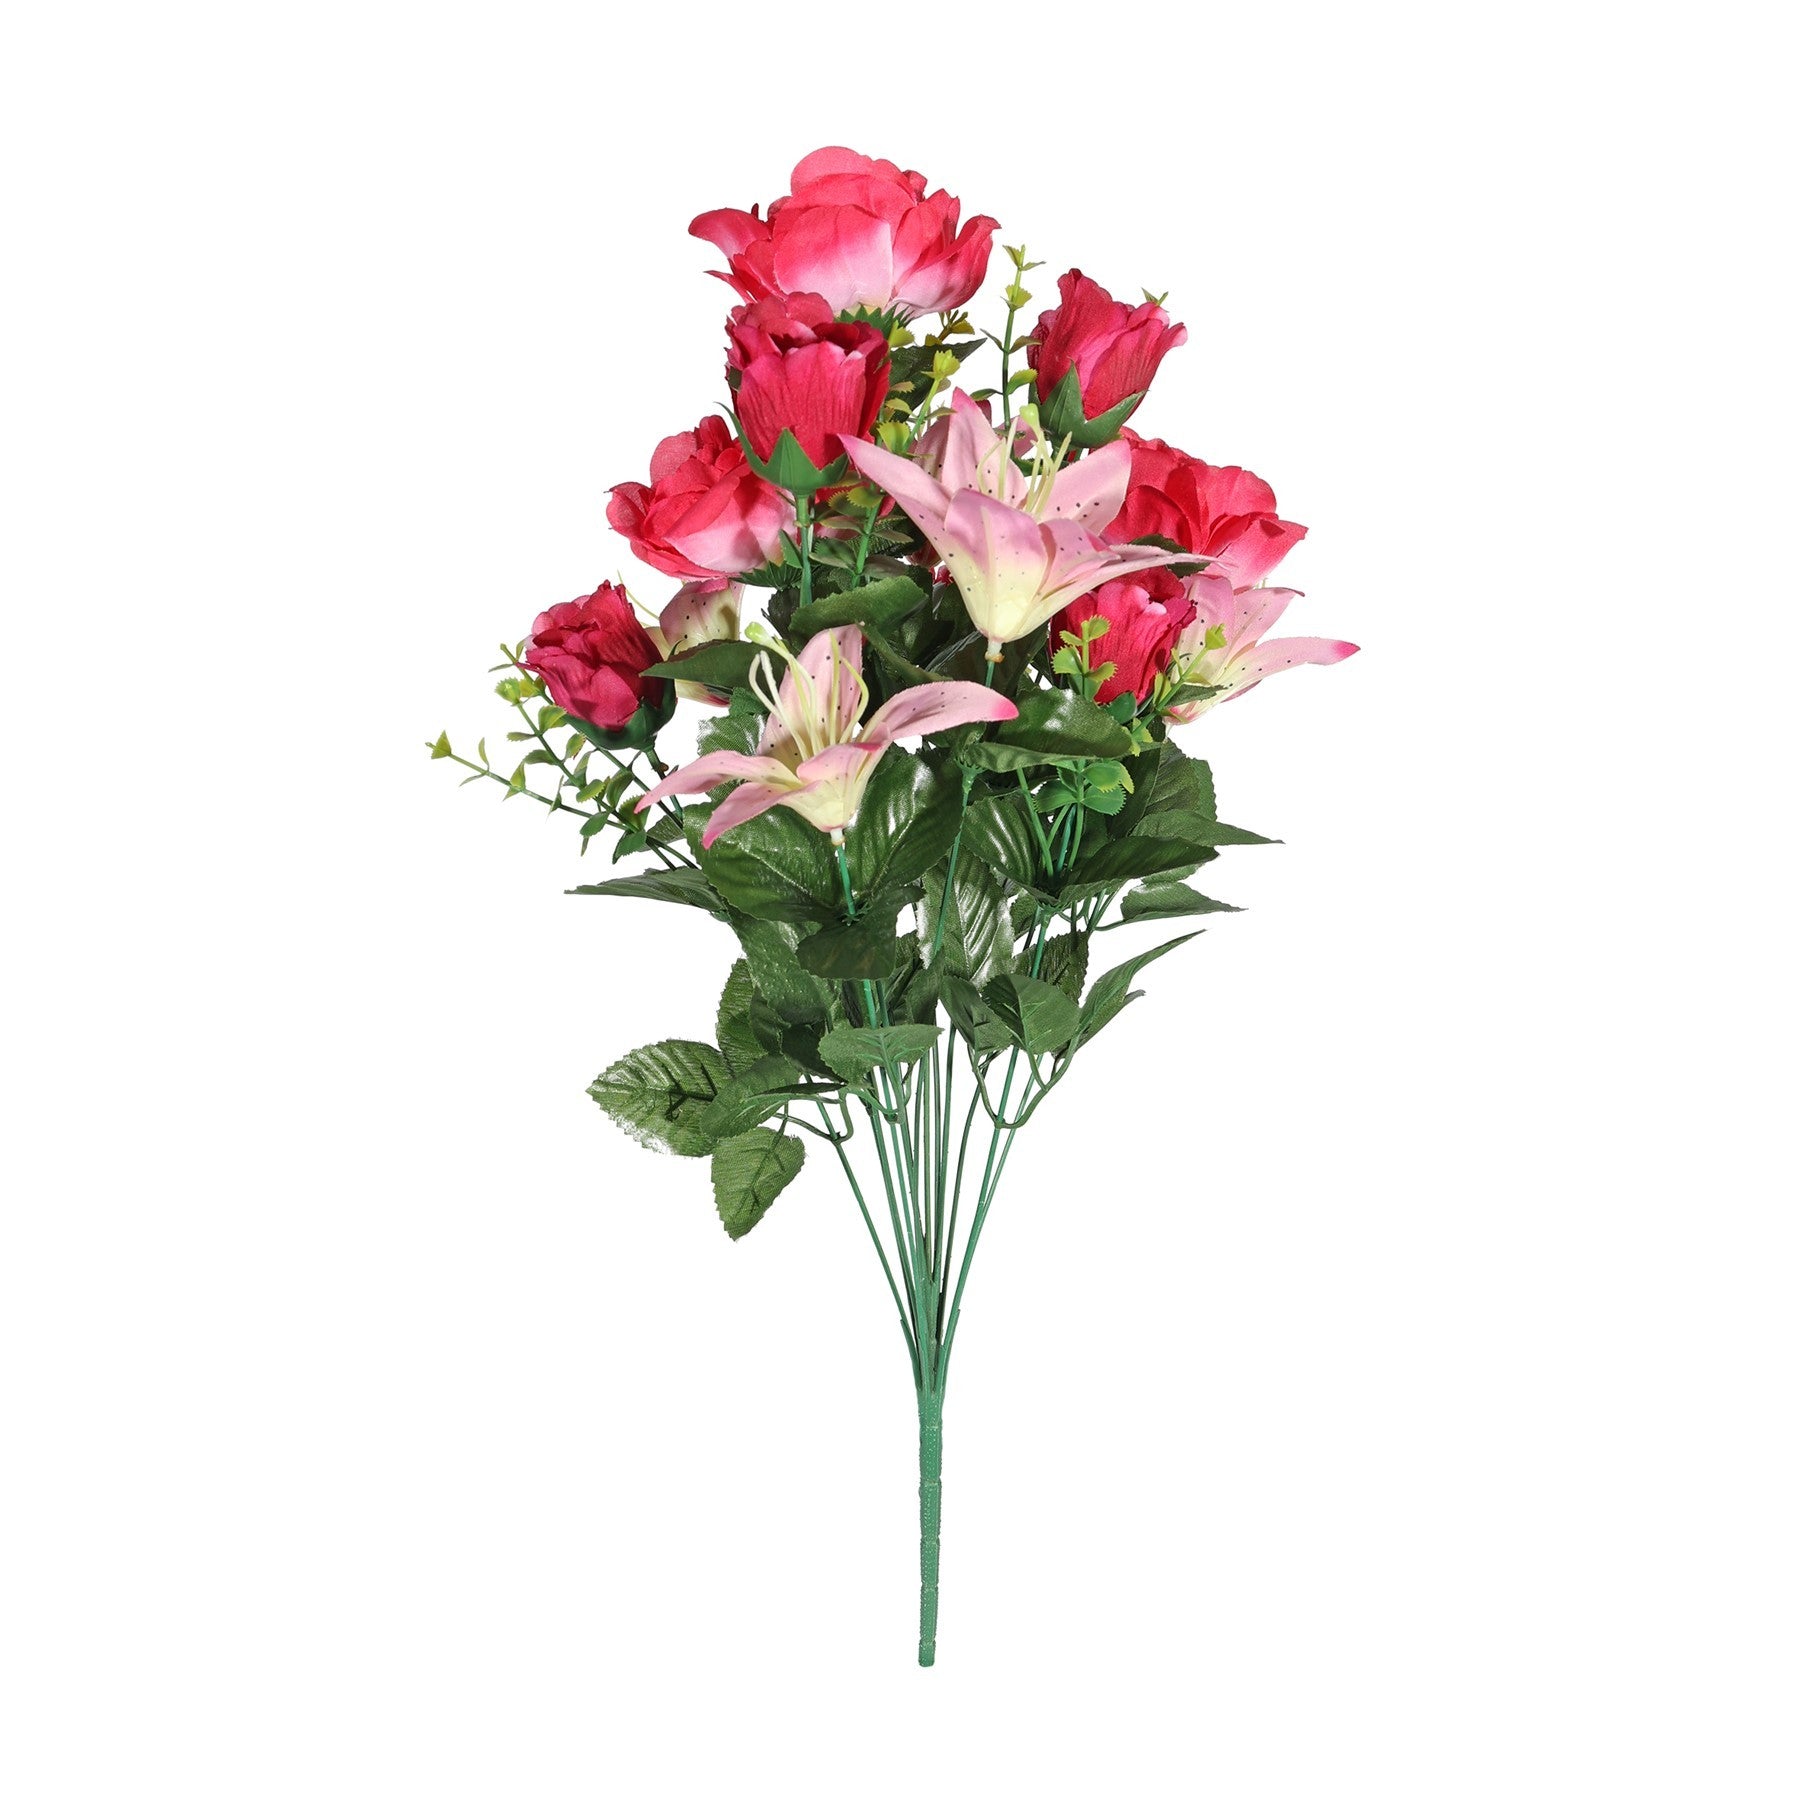 View Cerise Pembroke Rose and Lily Mixed Bunch information